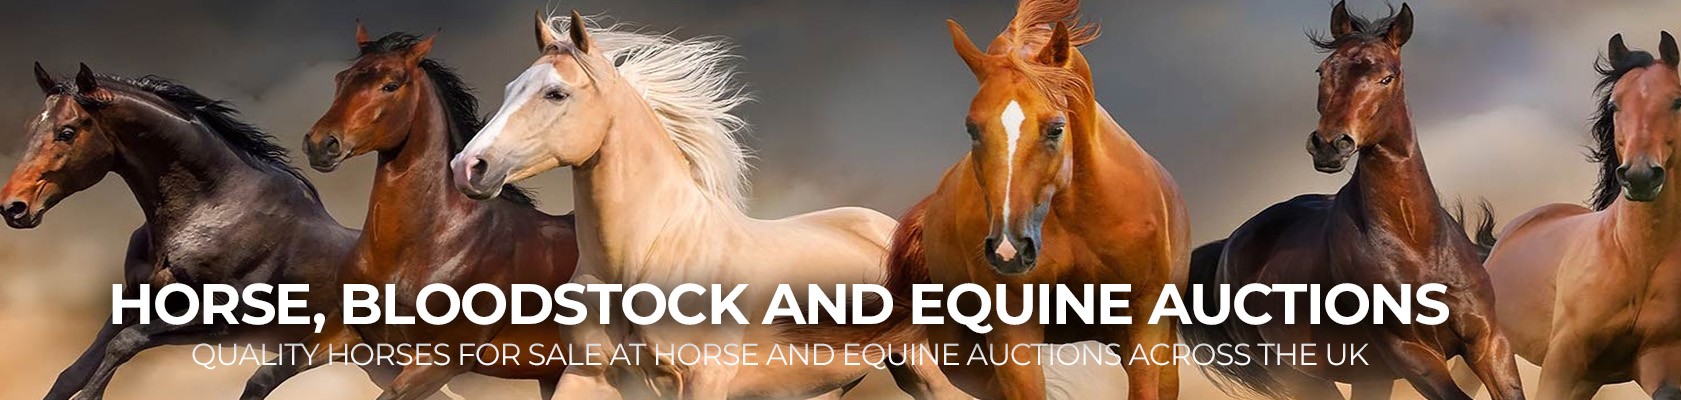 horse and equine auctions